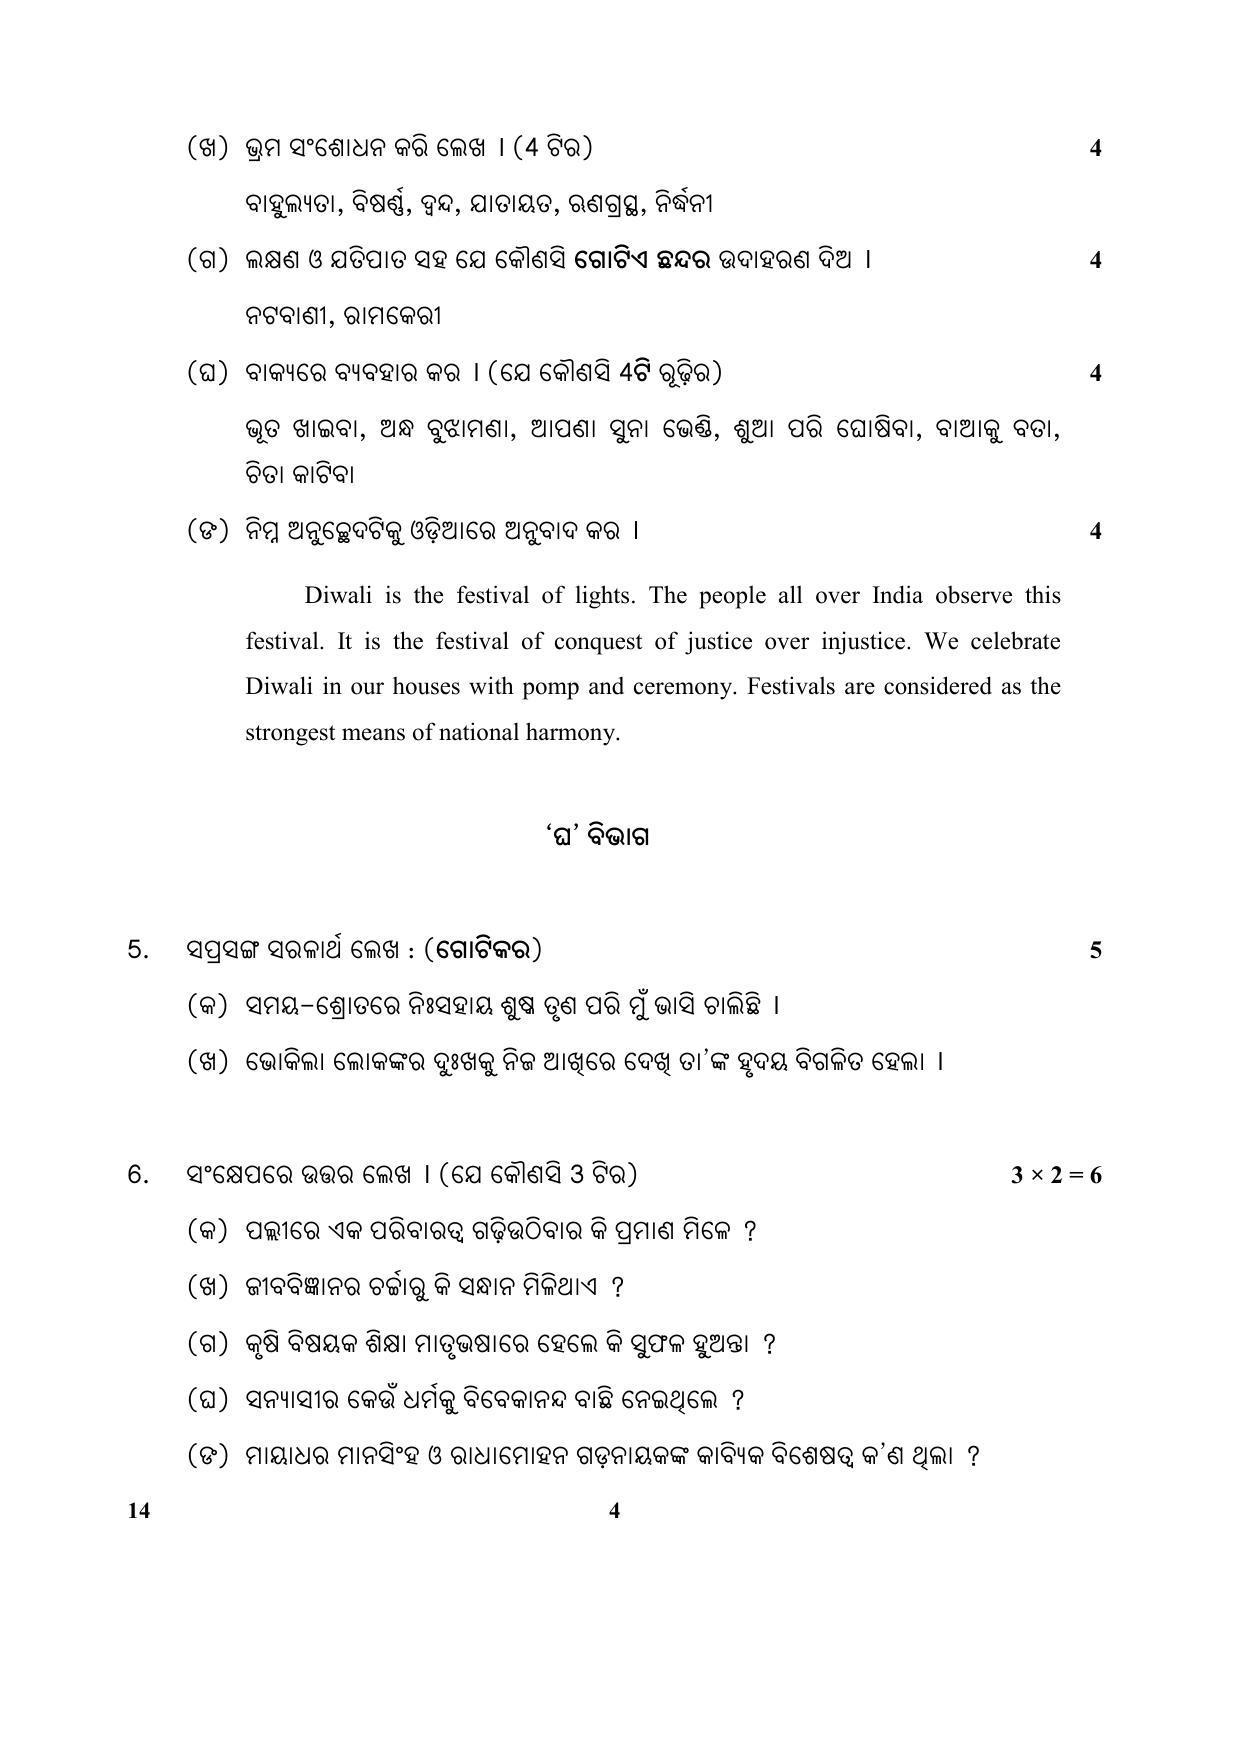 CBSE Class 10 14 (Odia) 2018 Question Paper - Page 4